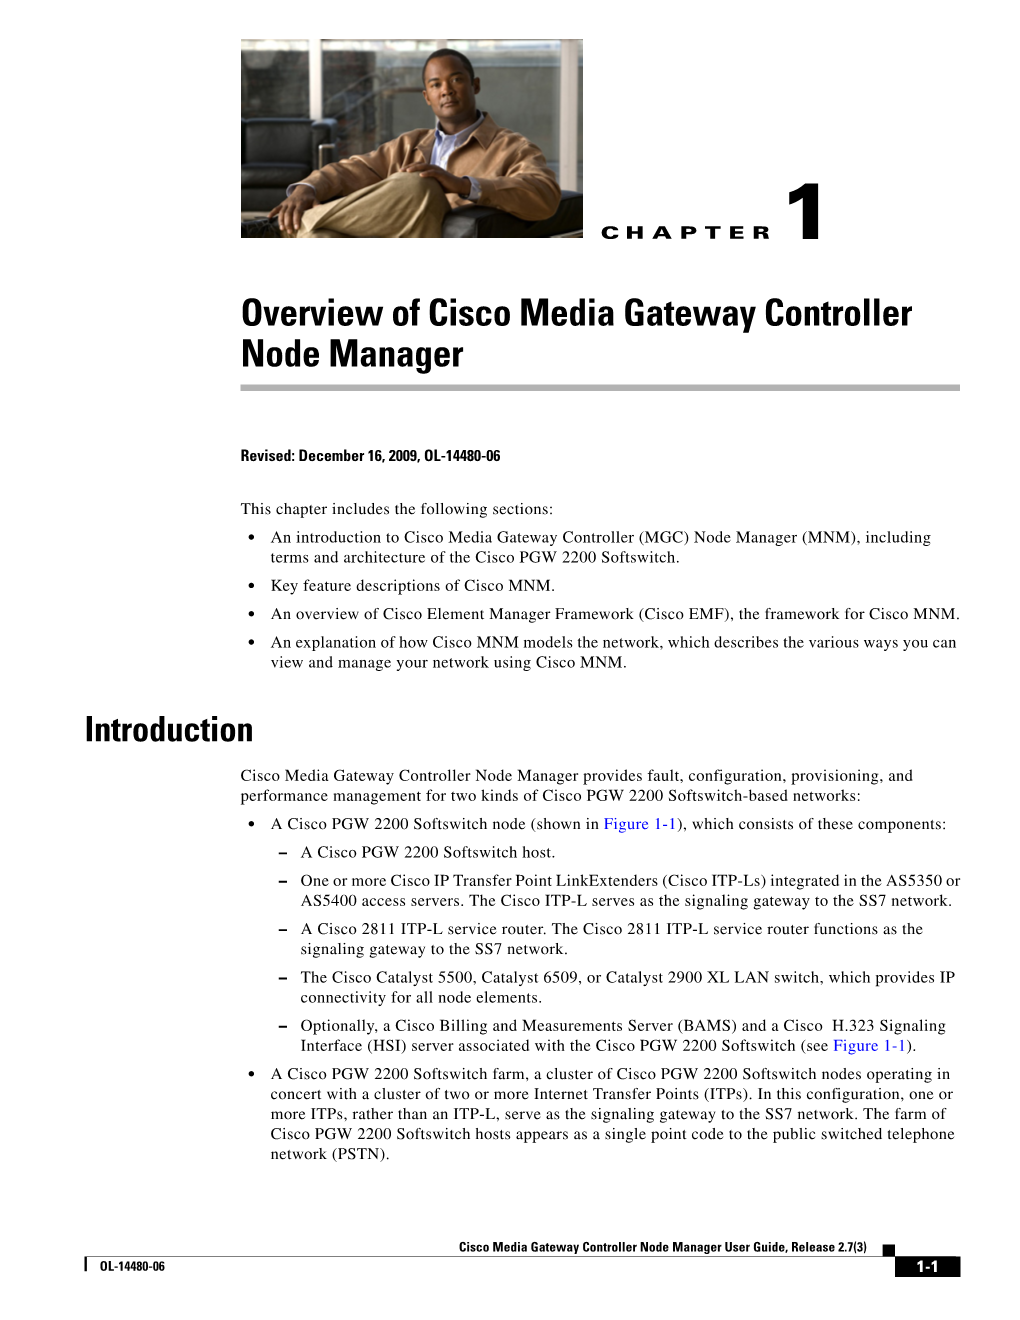 Overview of Cisco Media Gateway Controller Node Manager